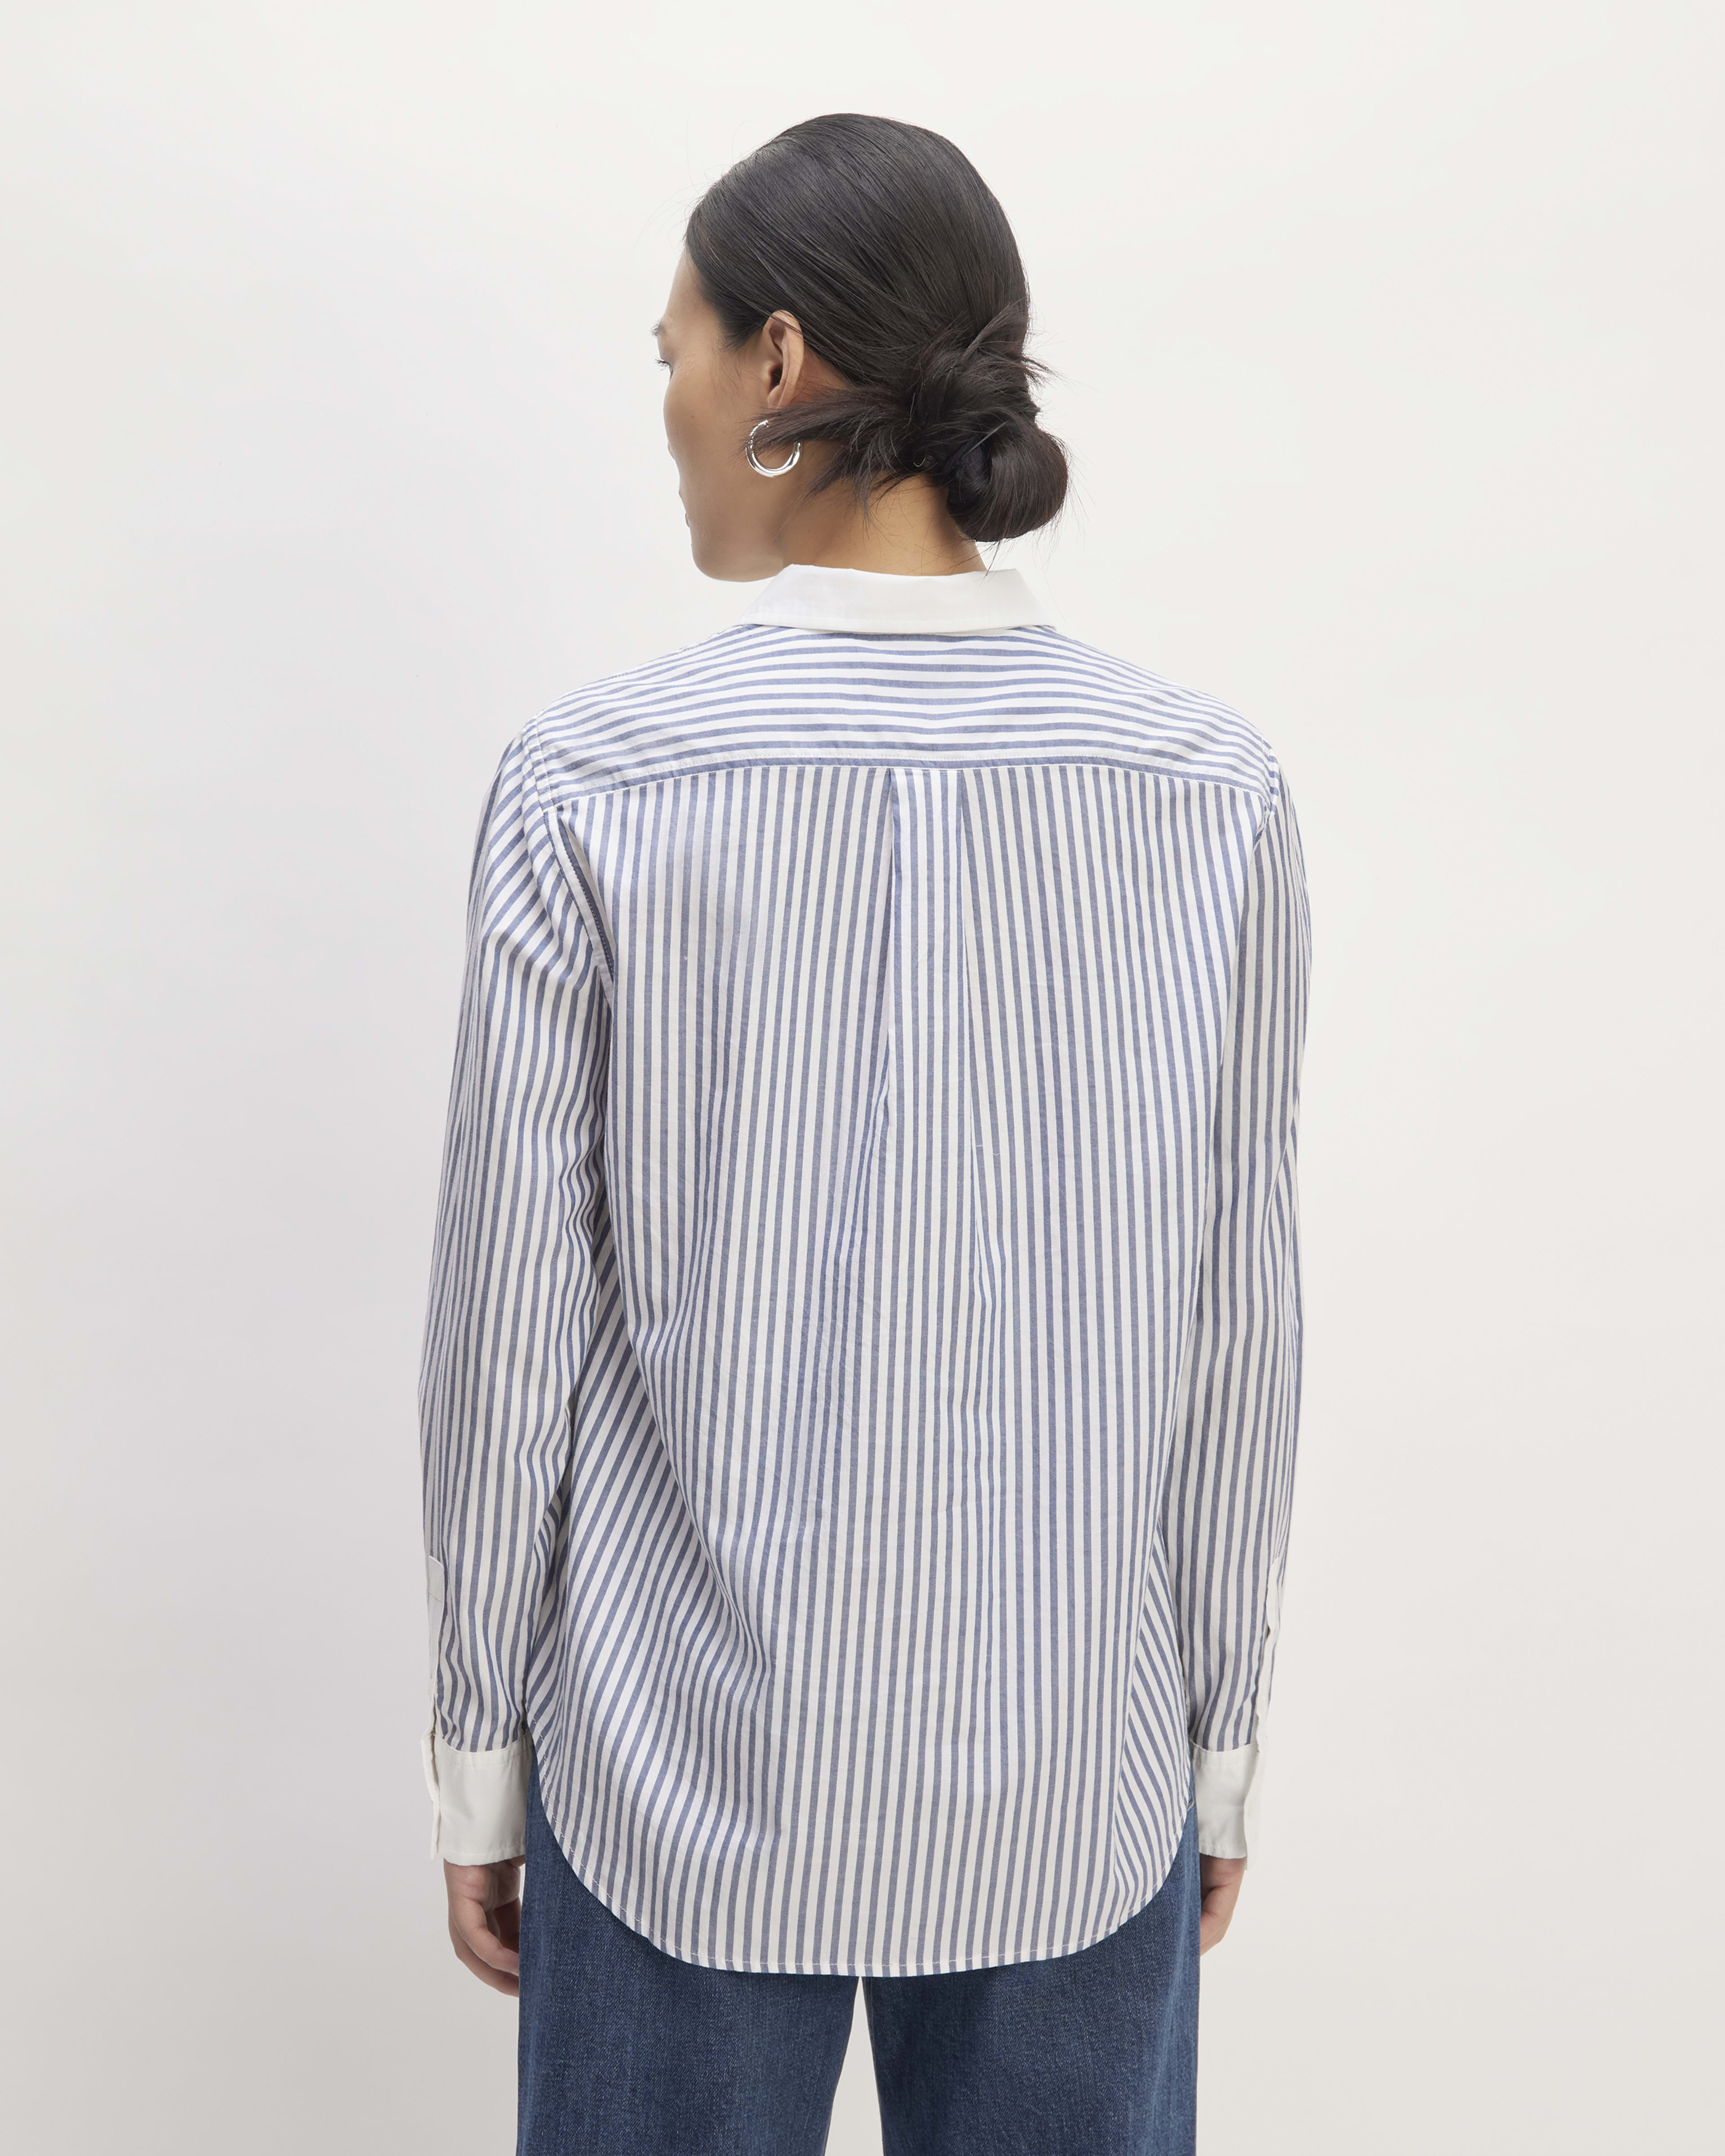 The Silky Cotton Relaxed Shirt Mariner Blue / White – Everlane